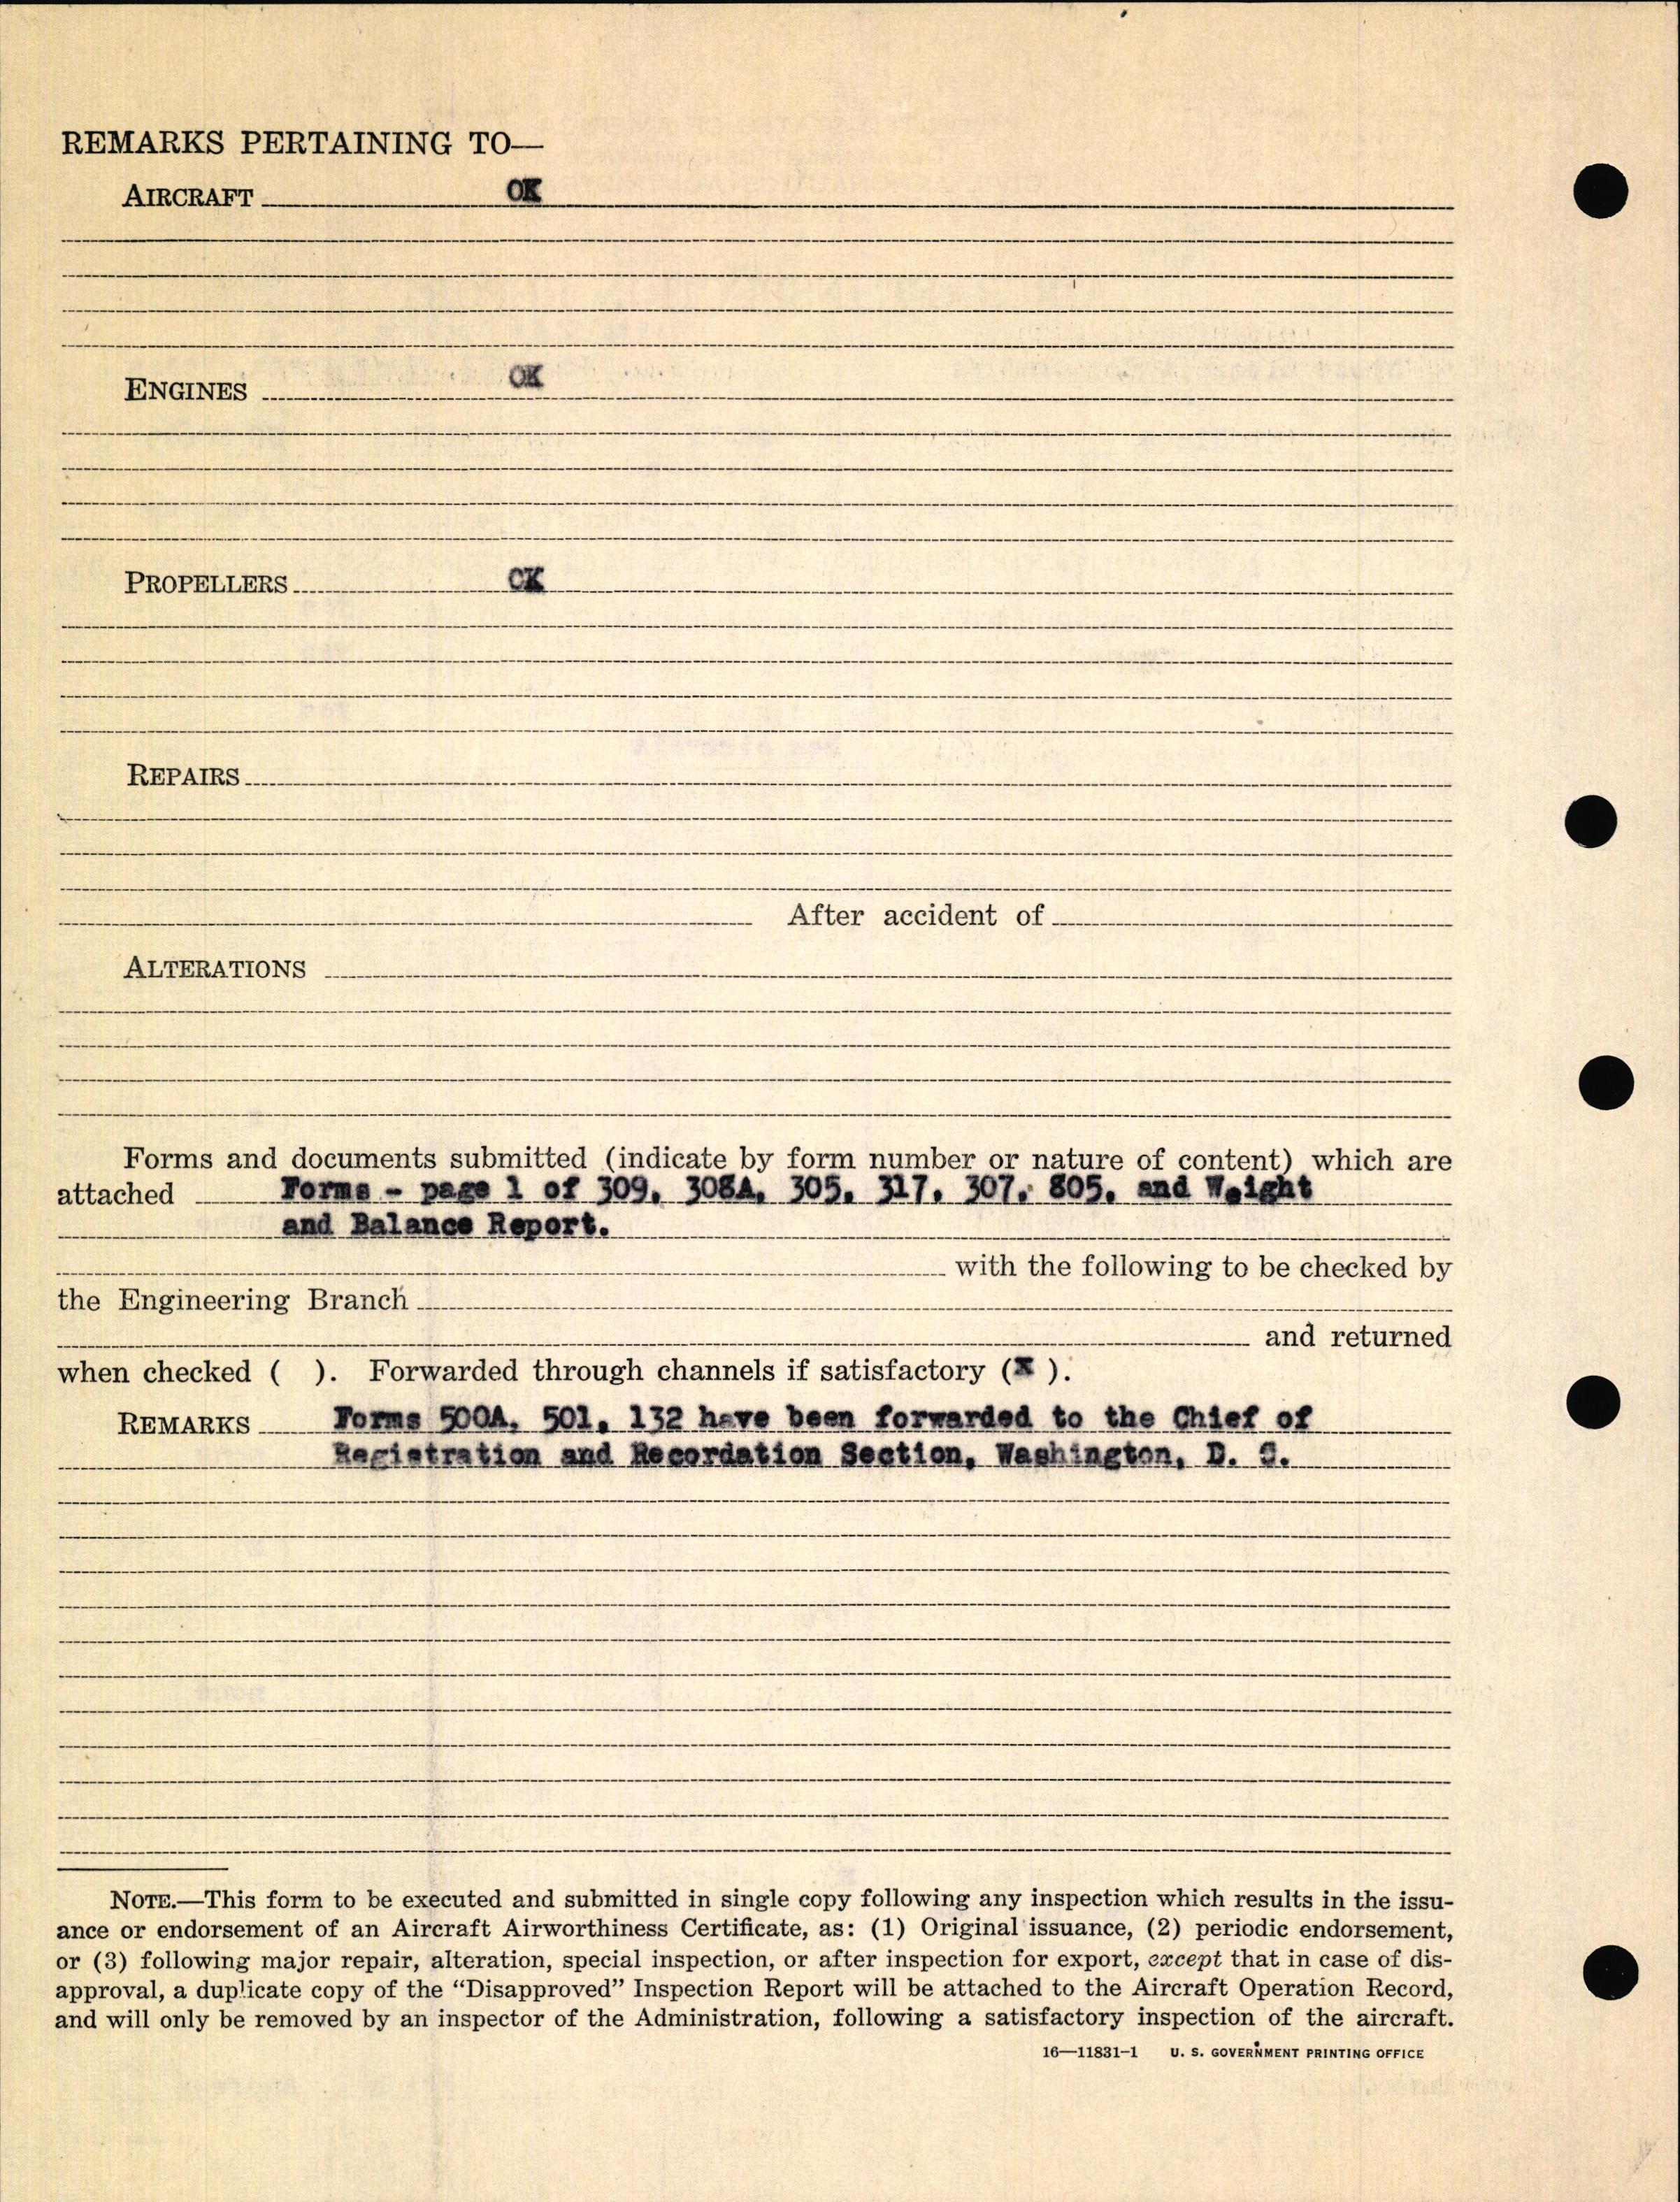 Sample page 6 from AirCorps Library document: Technical Information for Serial Number 1010